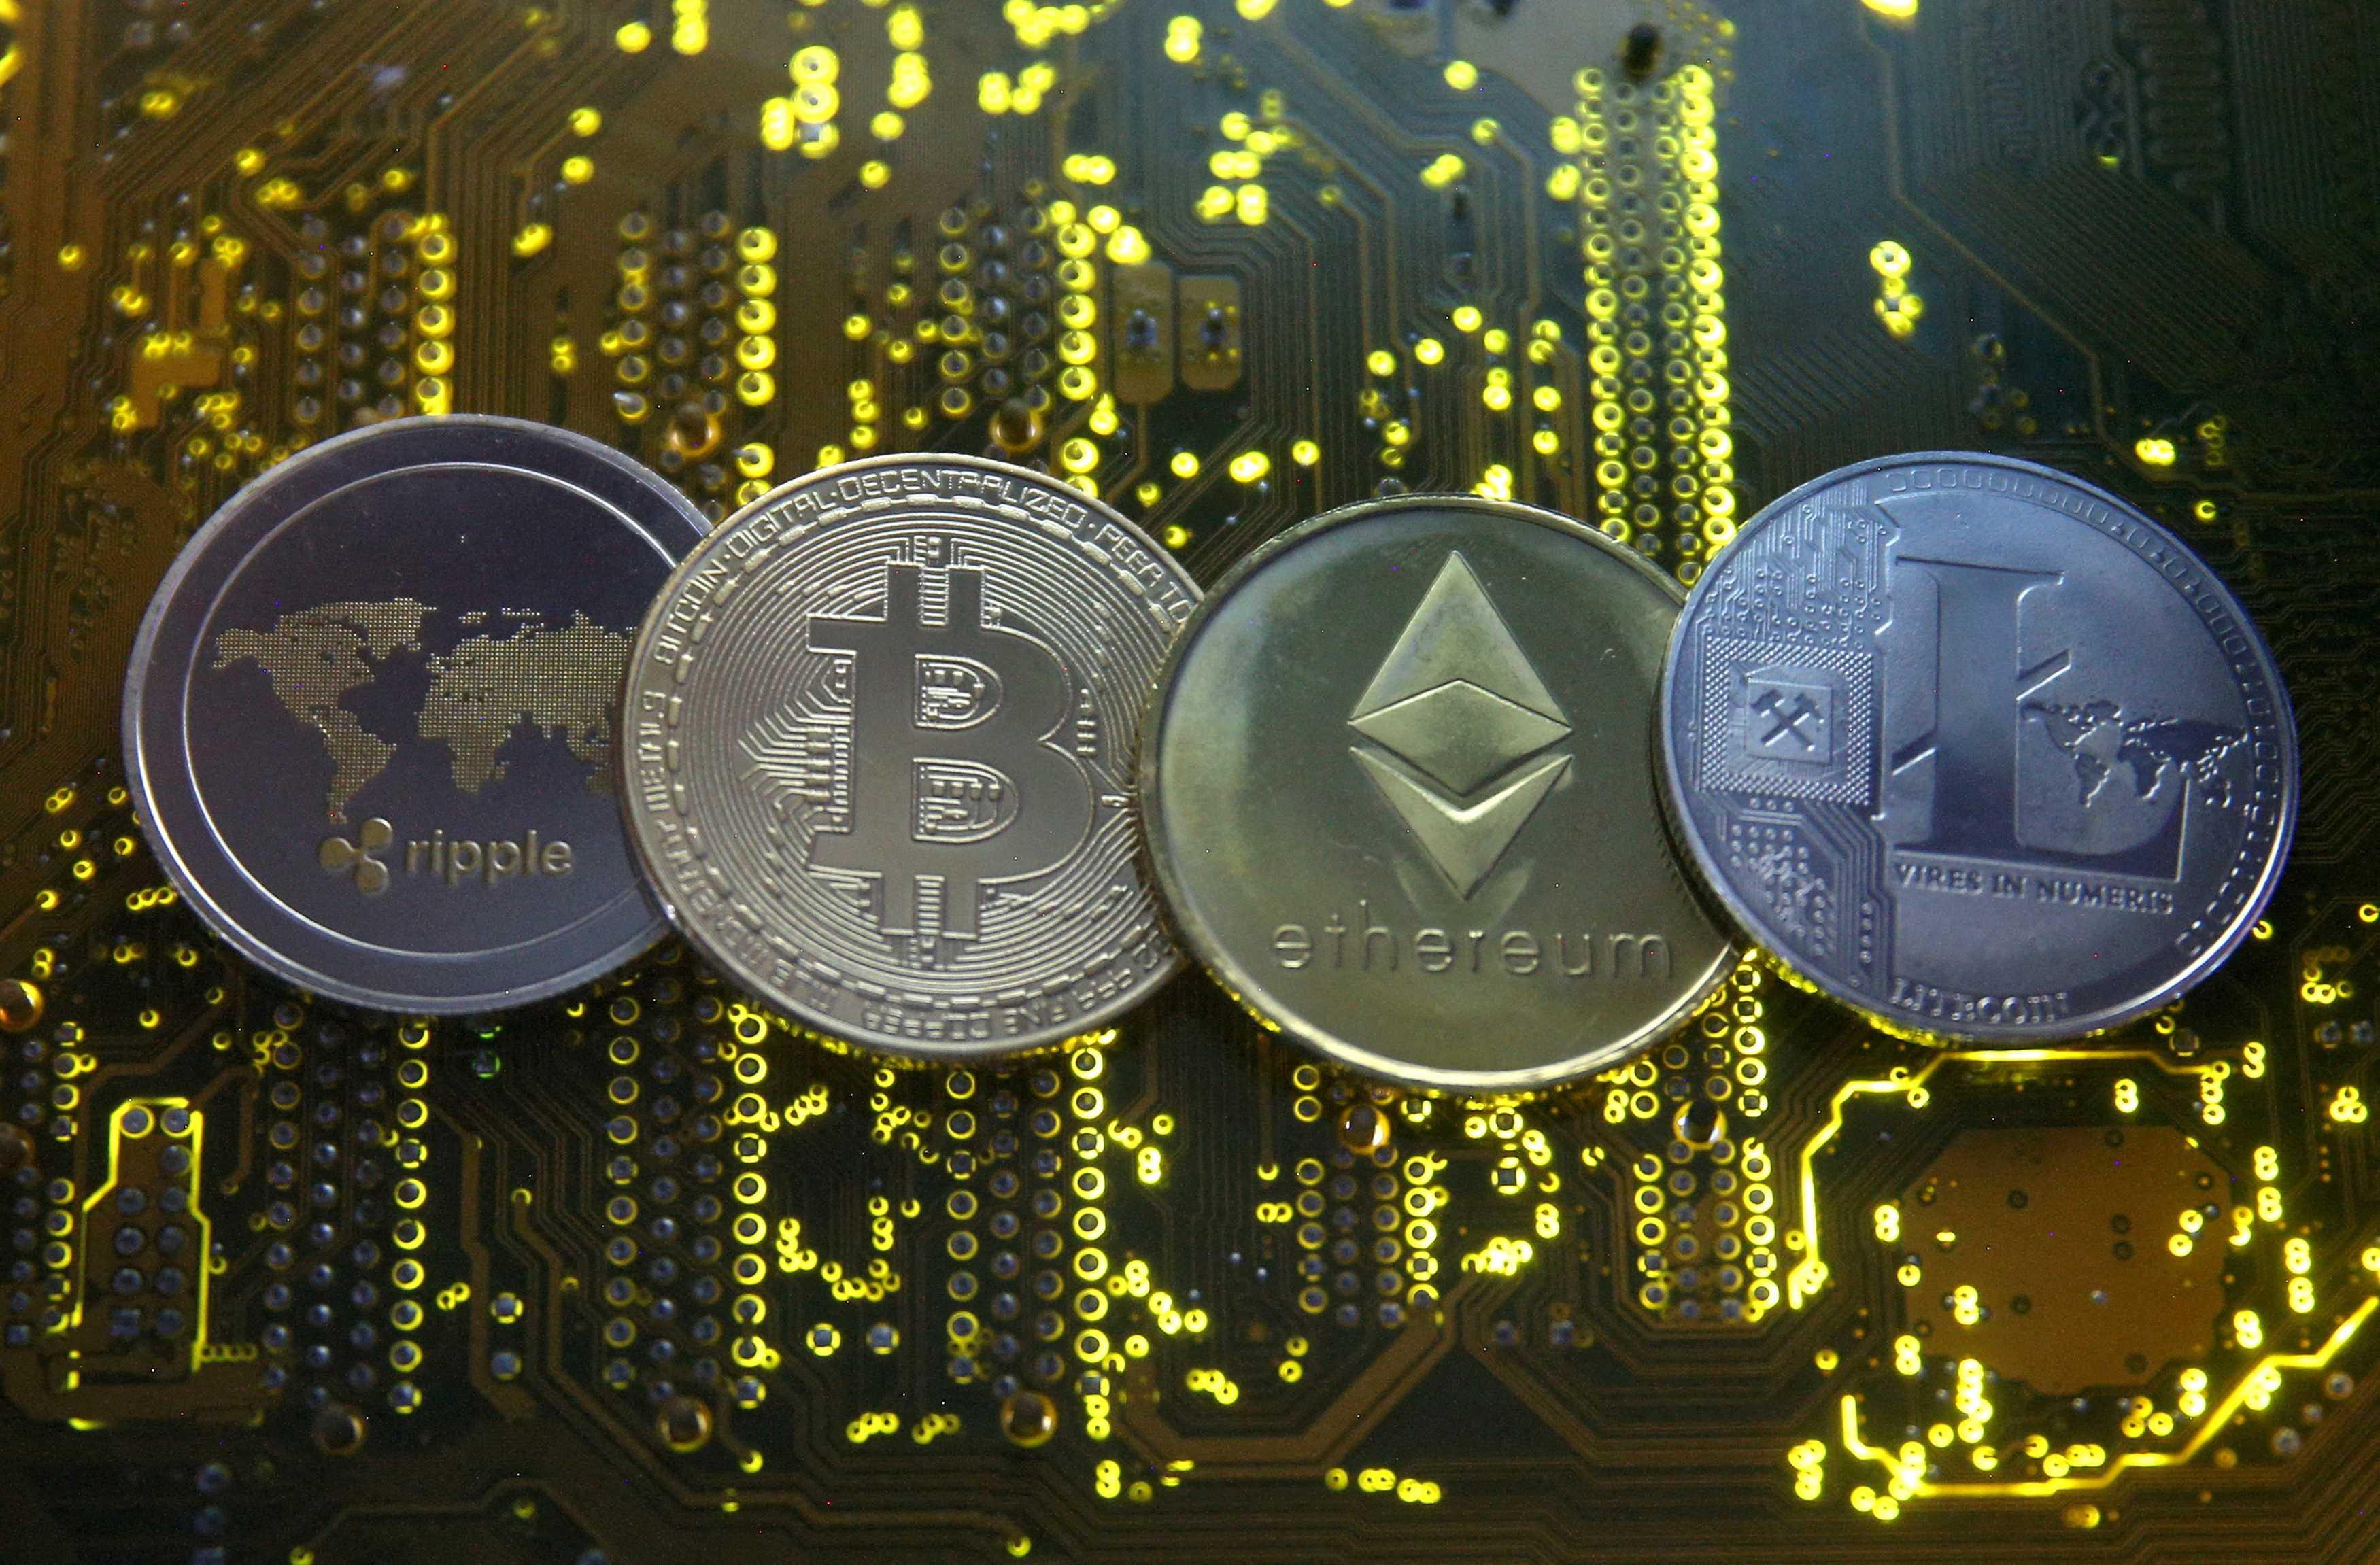 Representations of the Ripple, Bitcoin, Etherum and Litecoin virtual currencies are seen on a PC motherboard in this illustration picture, Feb 14, 2018. Photo: Reuters